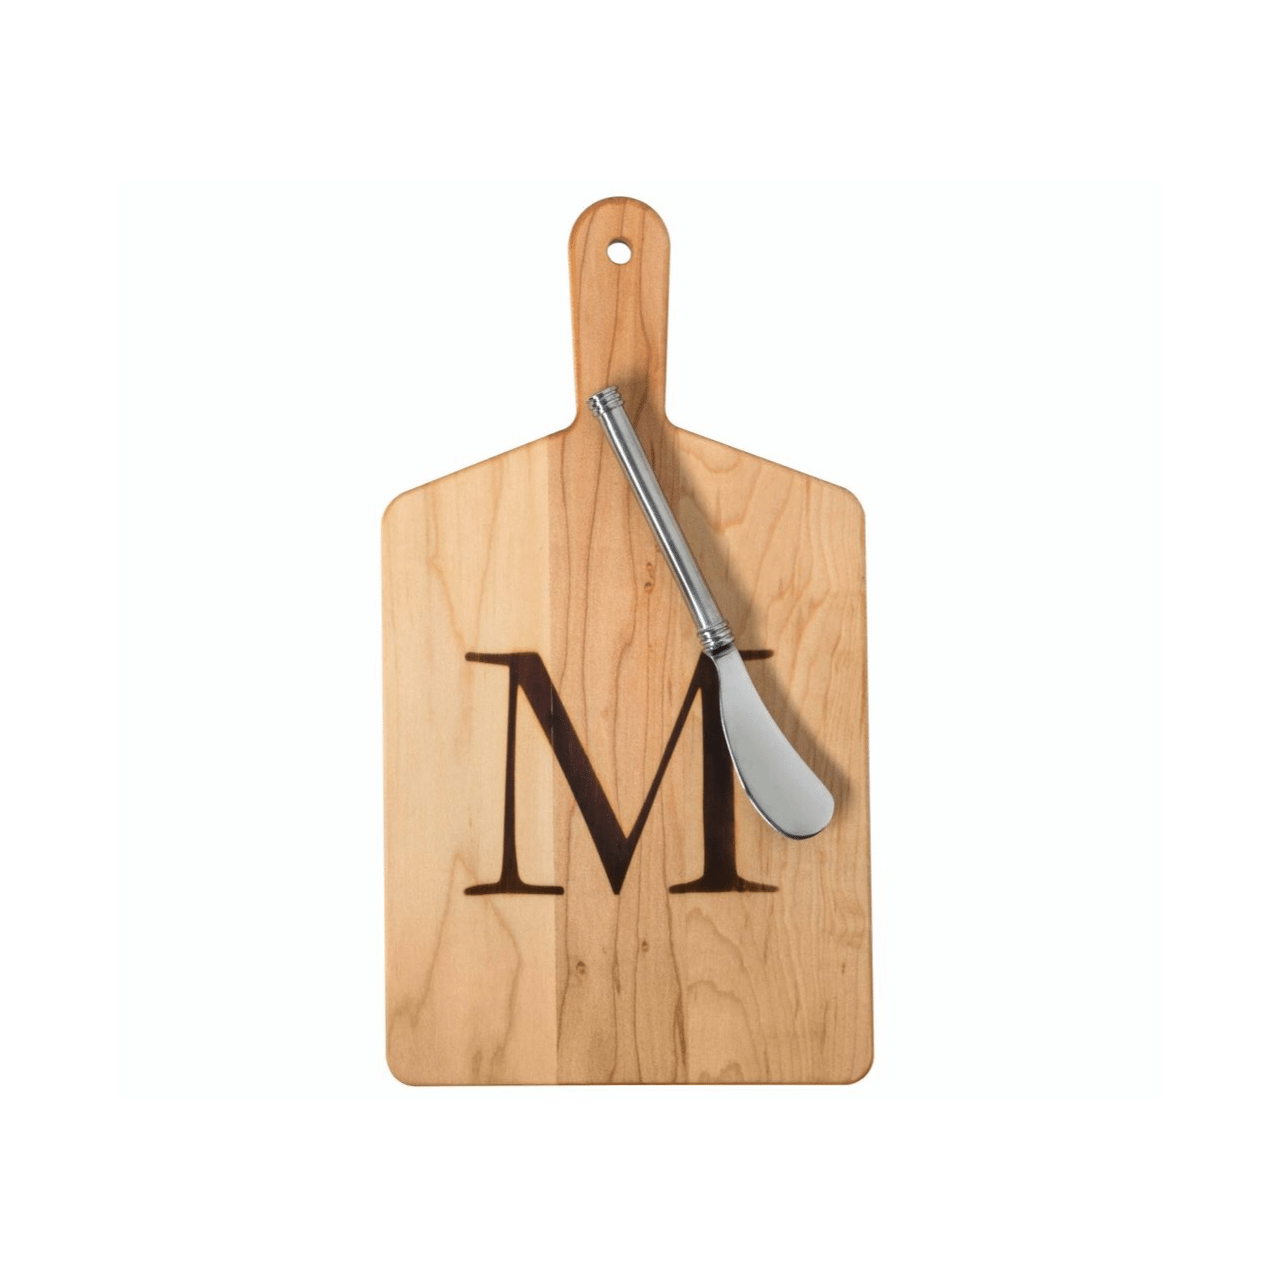 Maple Cheese Board with a Stamped P and Metal Spreader